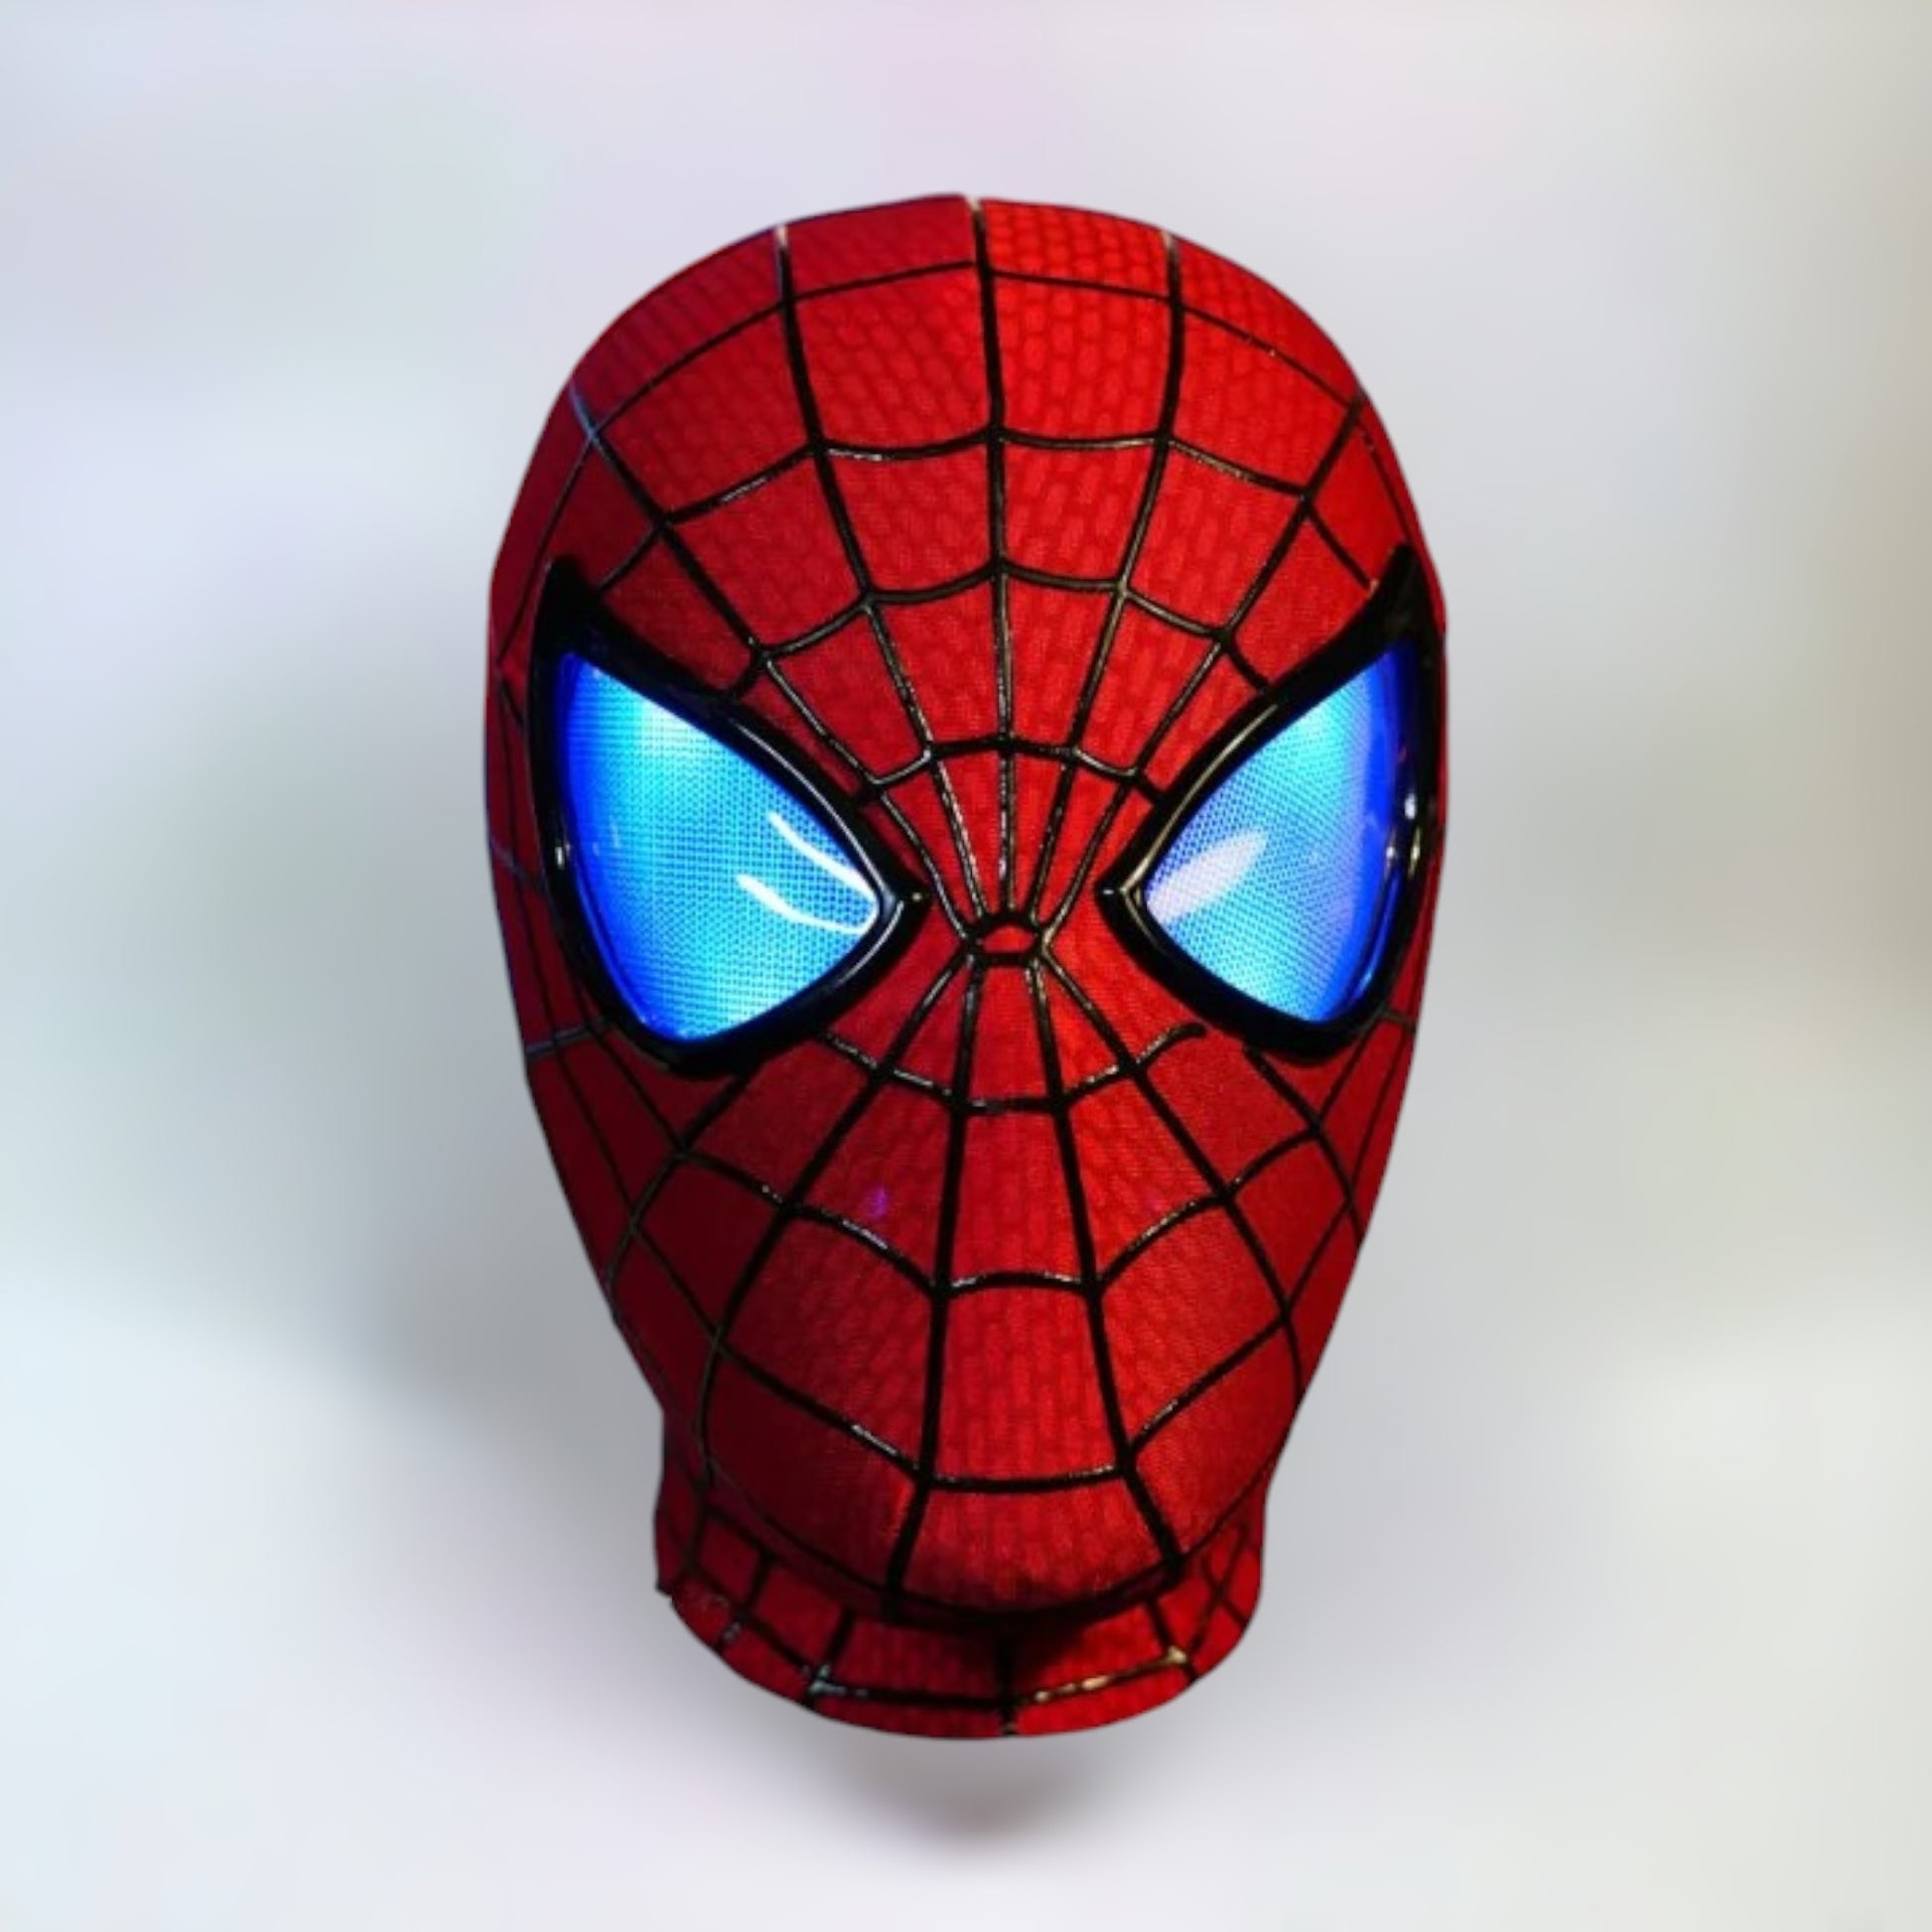 The Amazing Spiderman Mask with Blinking Movable Eyes Remote Controlled and LED Lights Blue LED Eyes Open Spiderman mask with plain white background